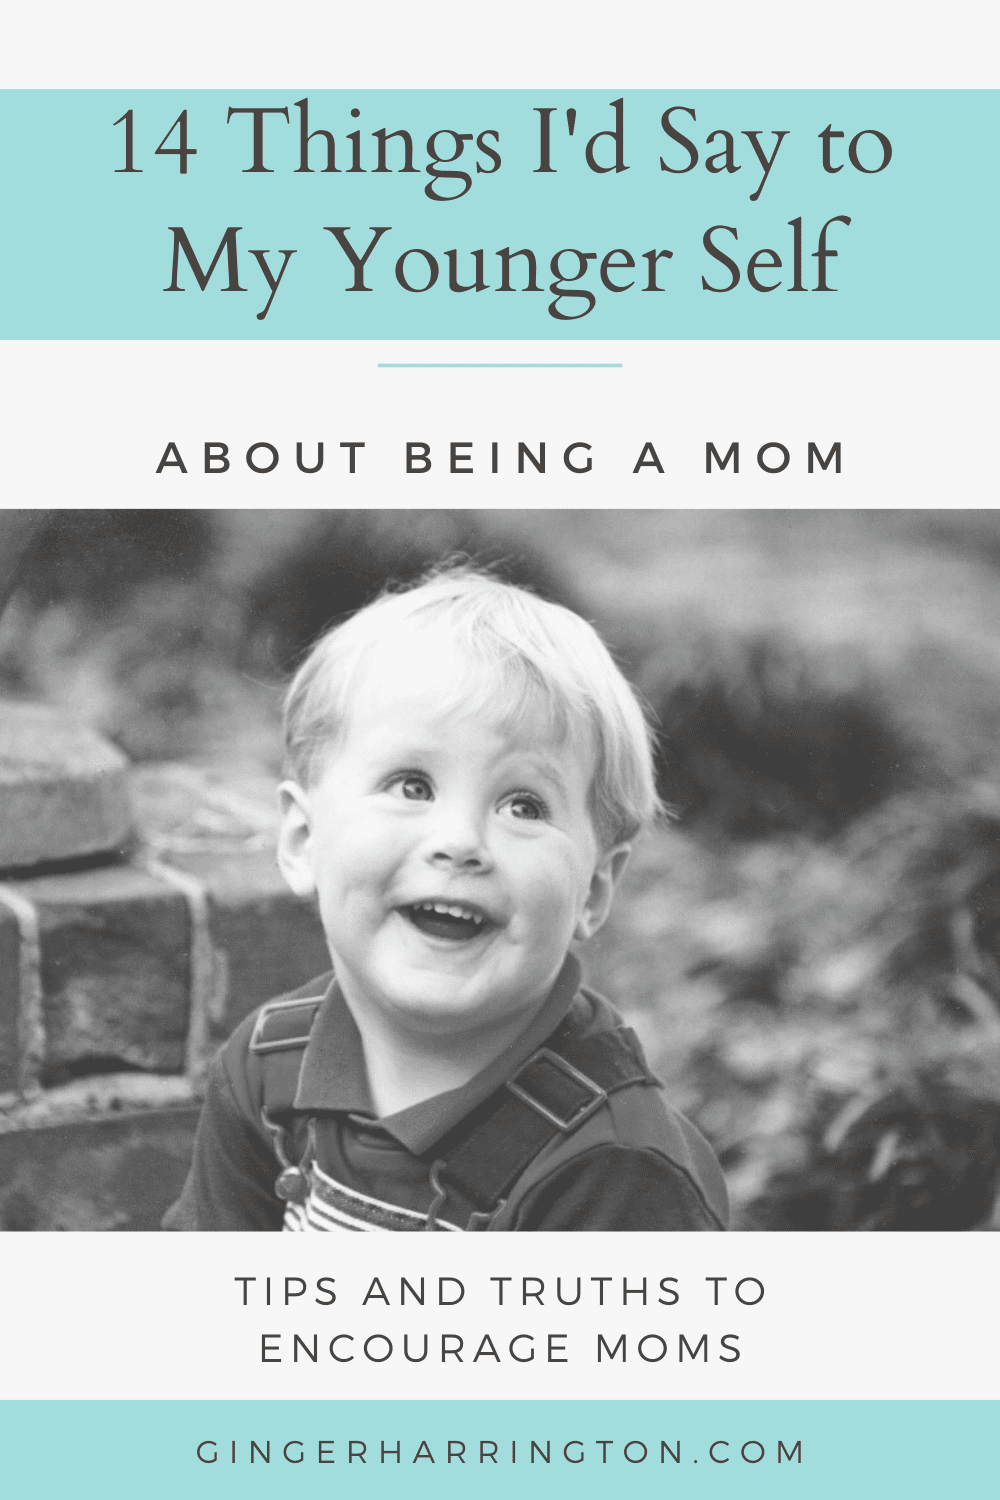 Tips and truths learned from experience in parenting. Experience is the best teacher, and these are the things I'd say to my younger self about being a mom. Parenting tips, encouragement and wisdom for moms is vital to the parenting journey. 